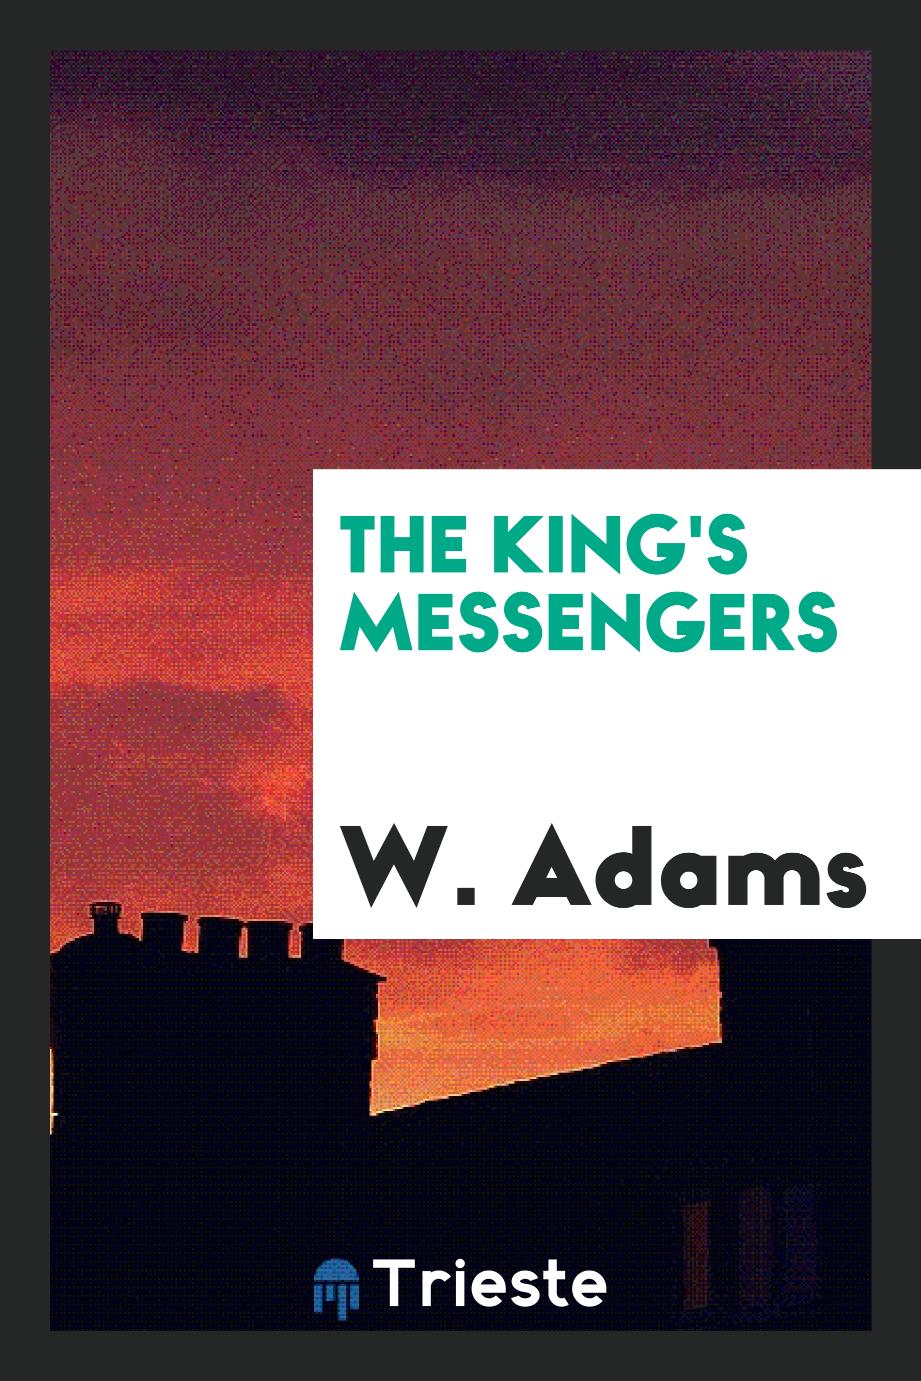 The King's Messengers